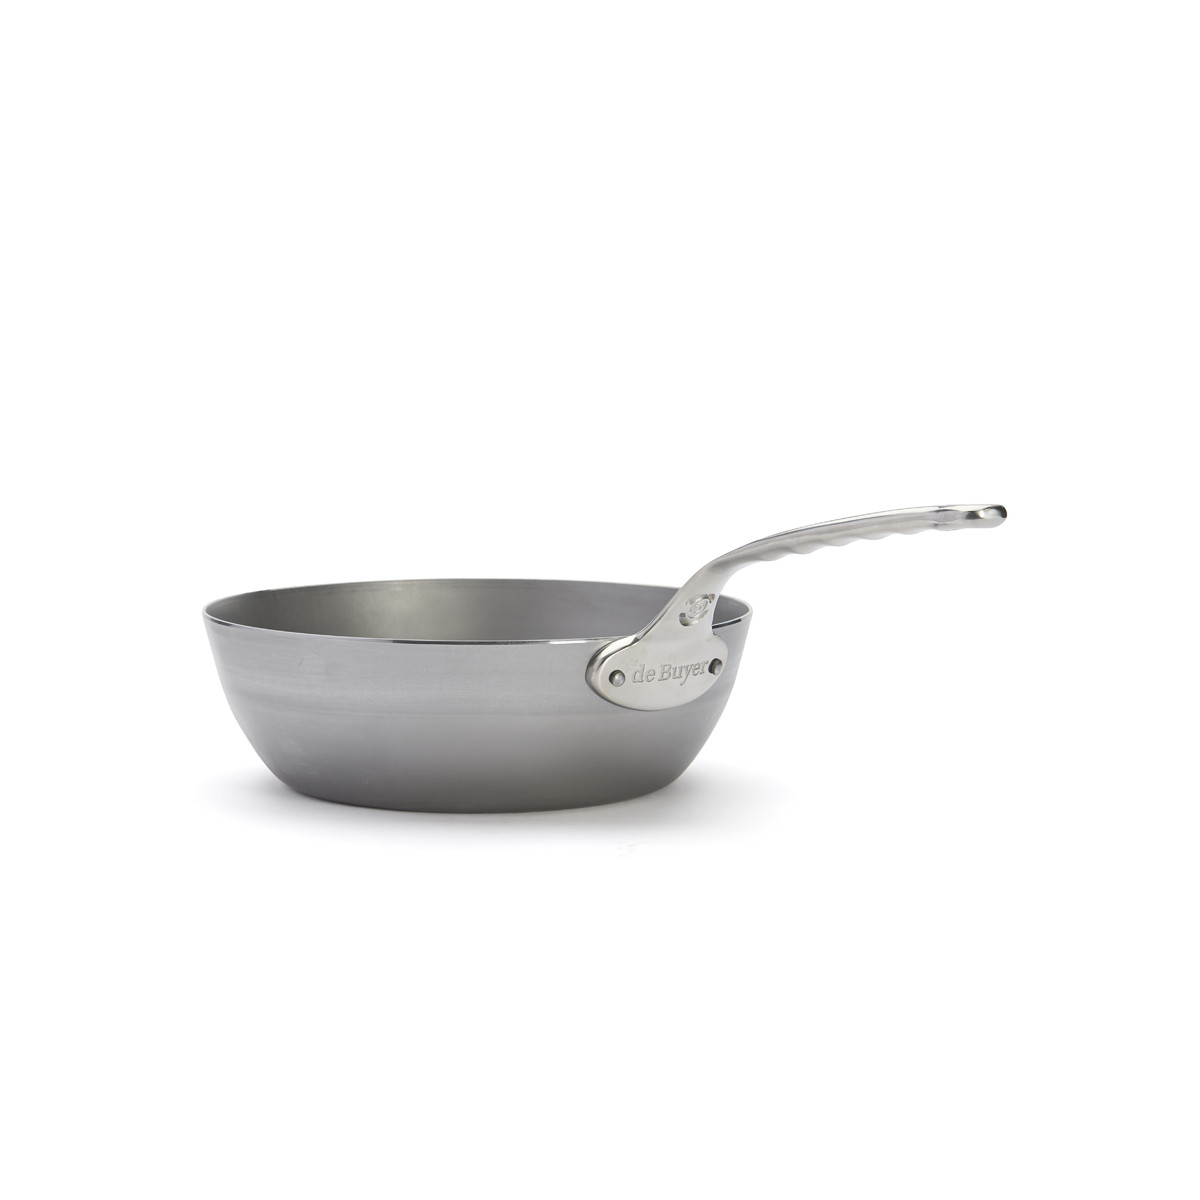 De Buyer Mineral B Removable Steel Country Pan